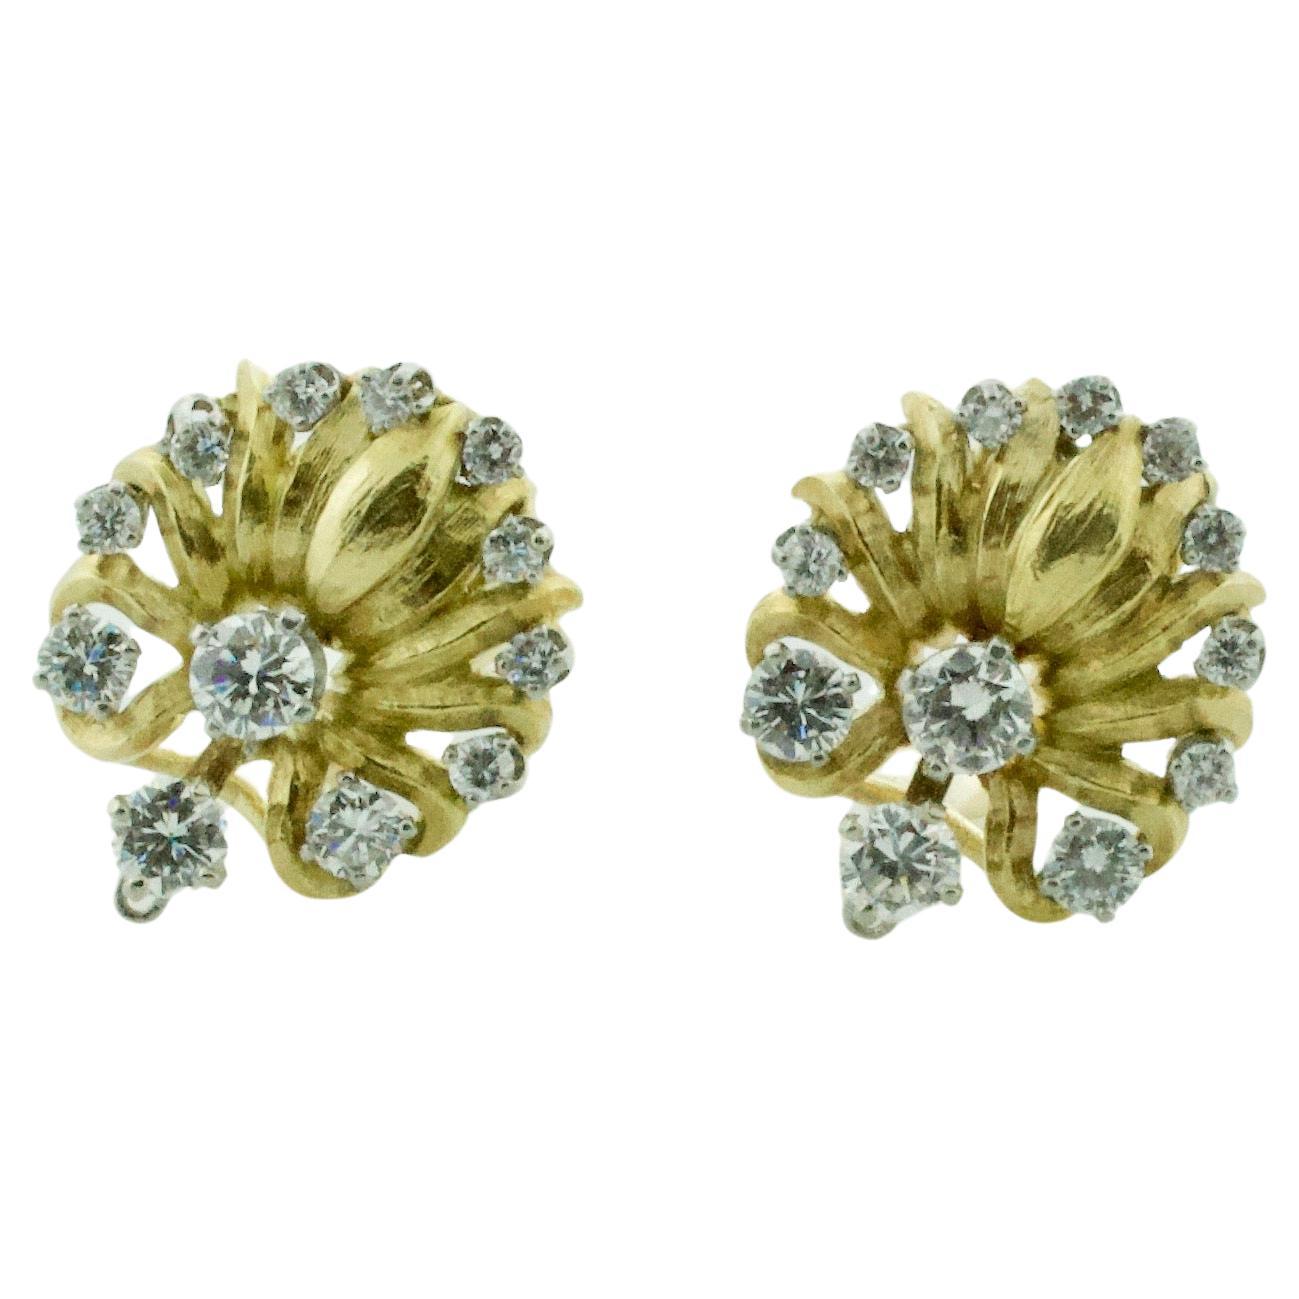 Delightful 18k Yellow and White Gold Earrings, Circa 1950's For Sale